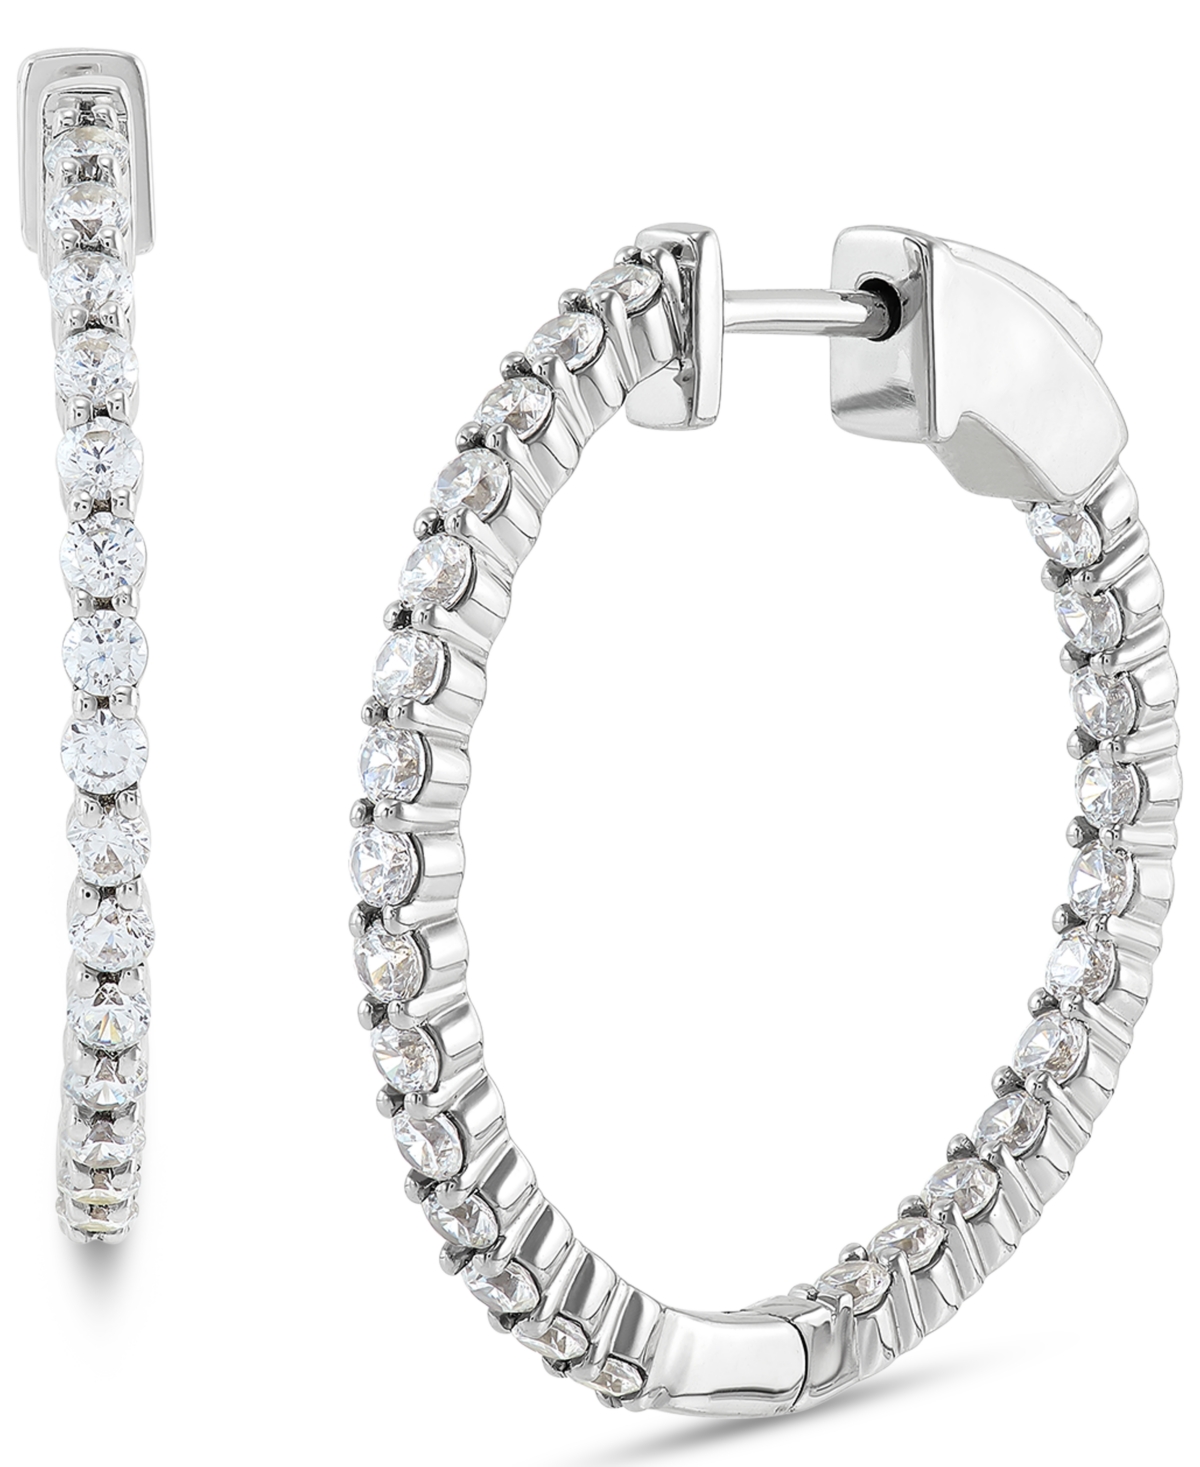 Lab Grown Diamond Small Hoop Earrings (1 ct. t.w.) in 14k White Gold - White Gold